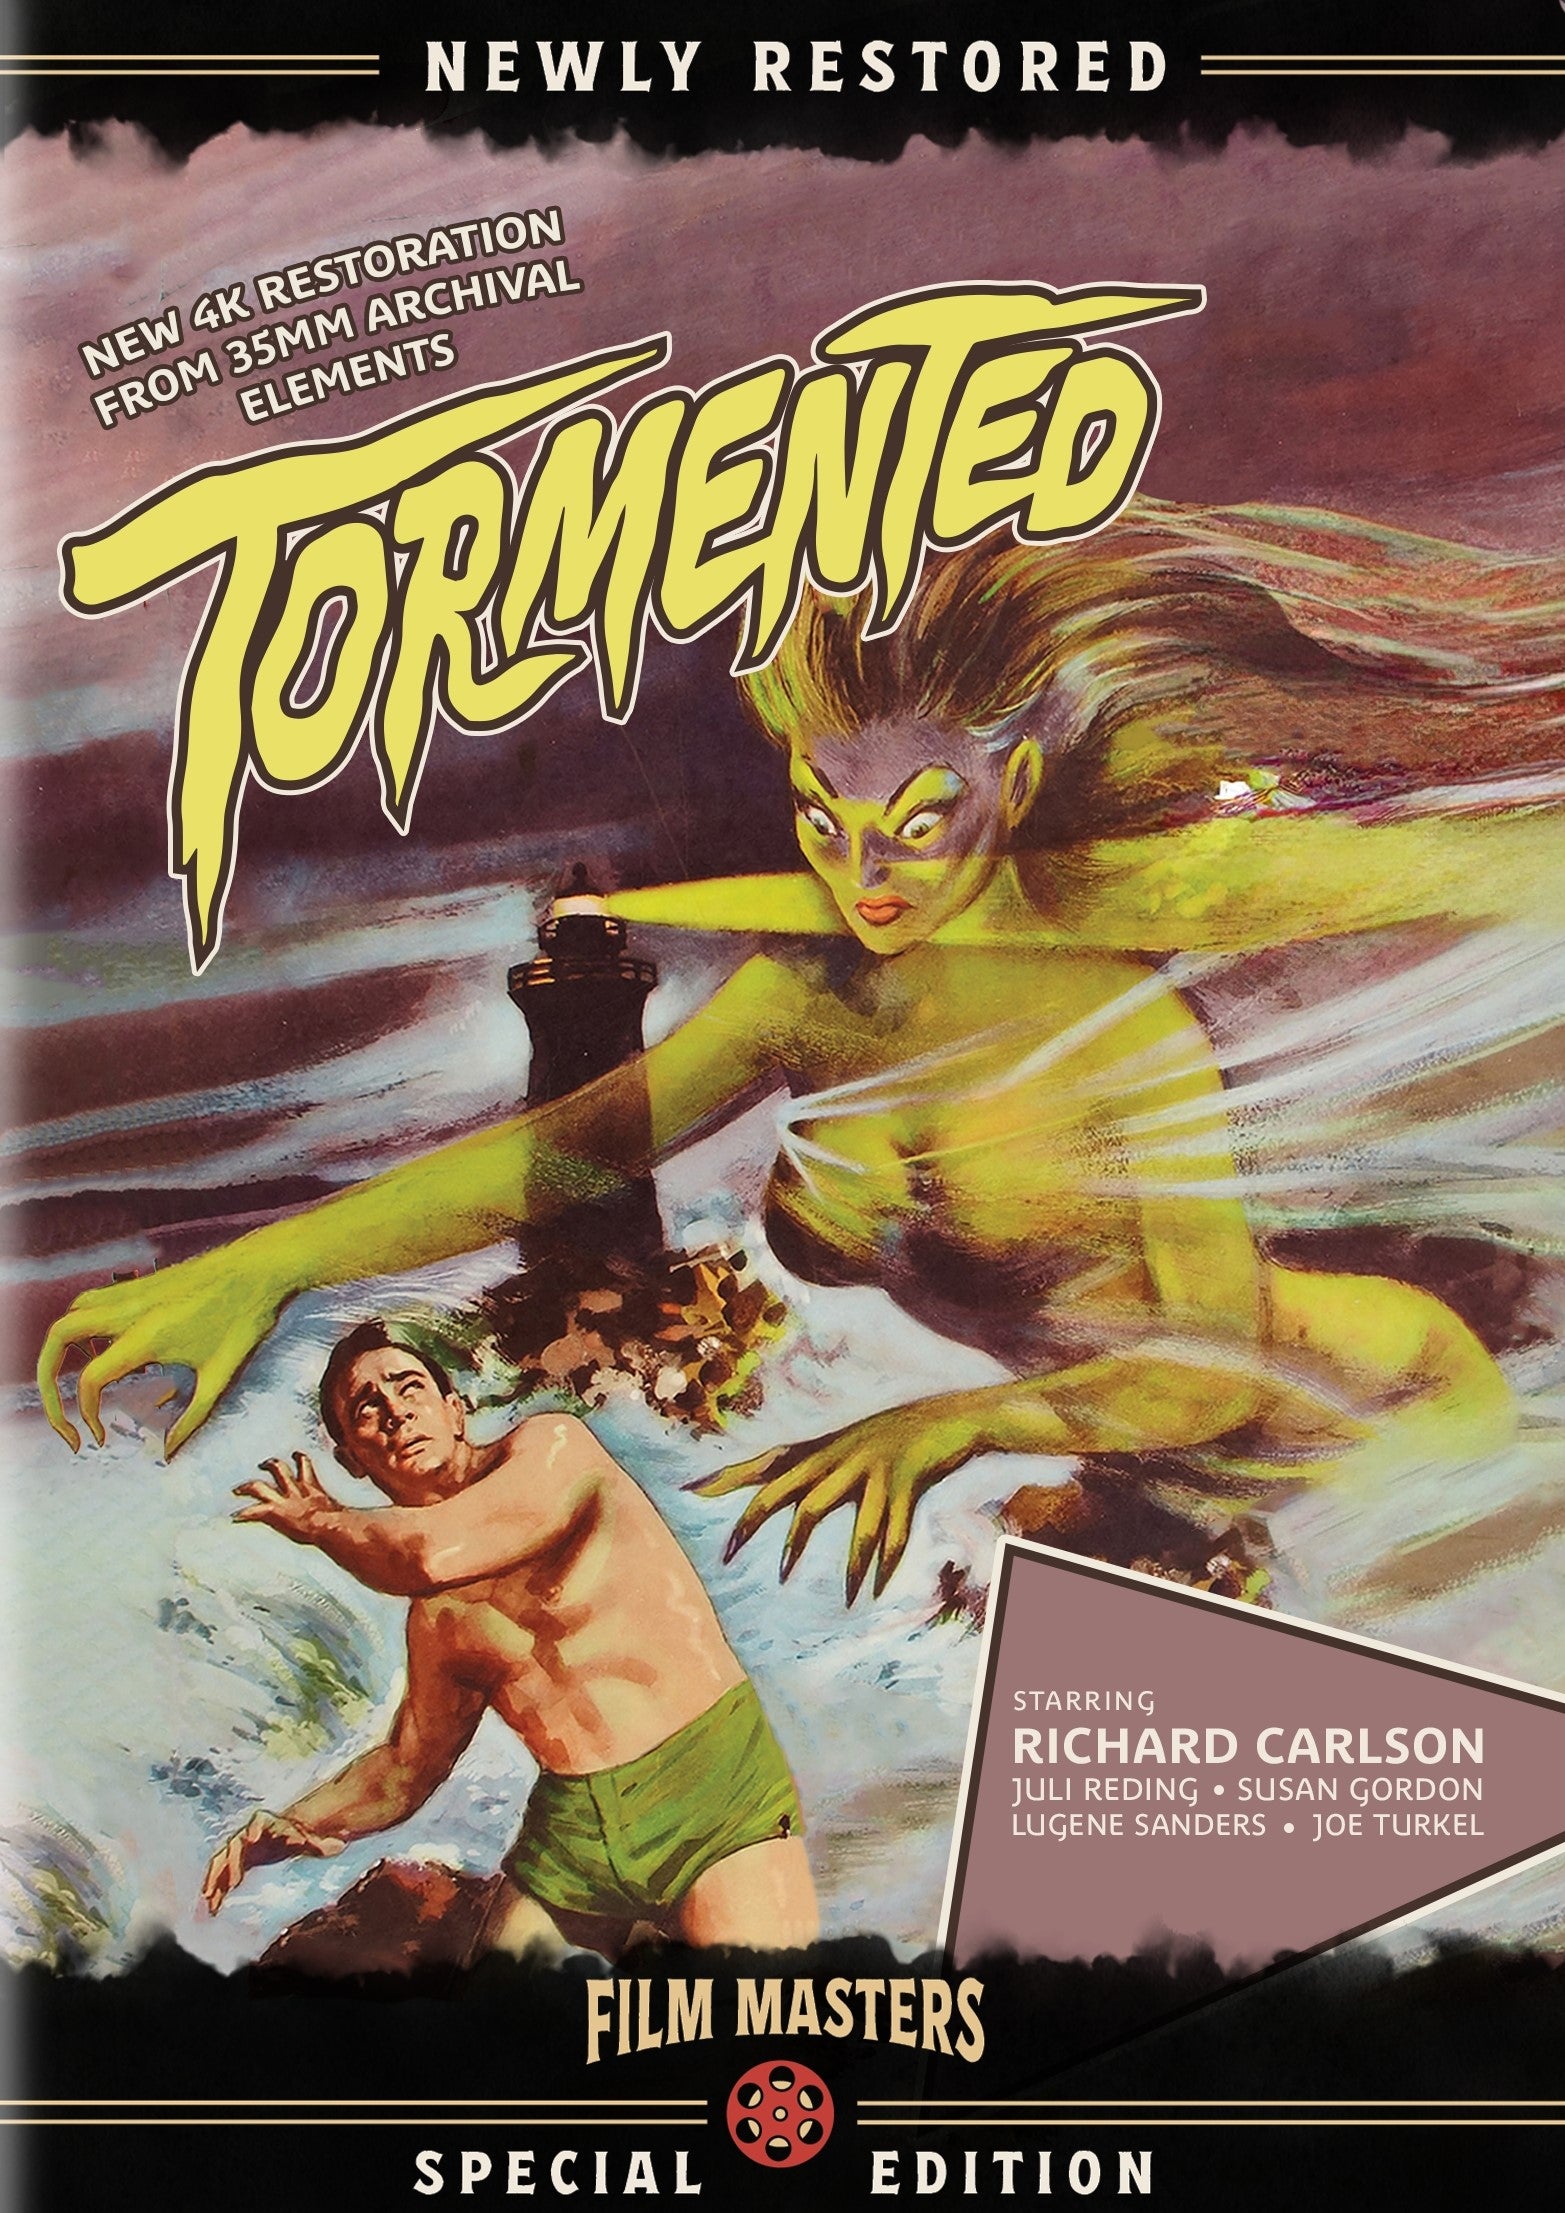 TORMENTED DVD